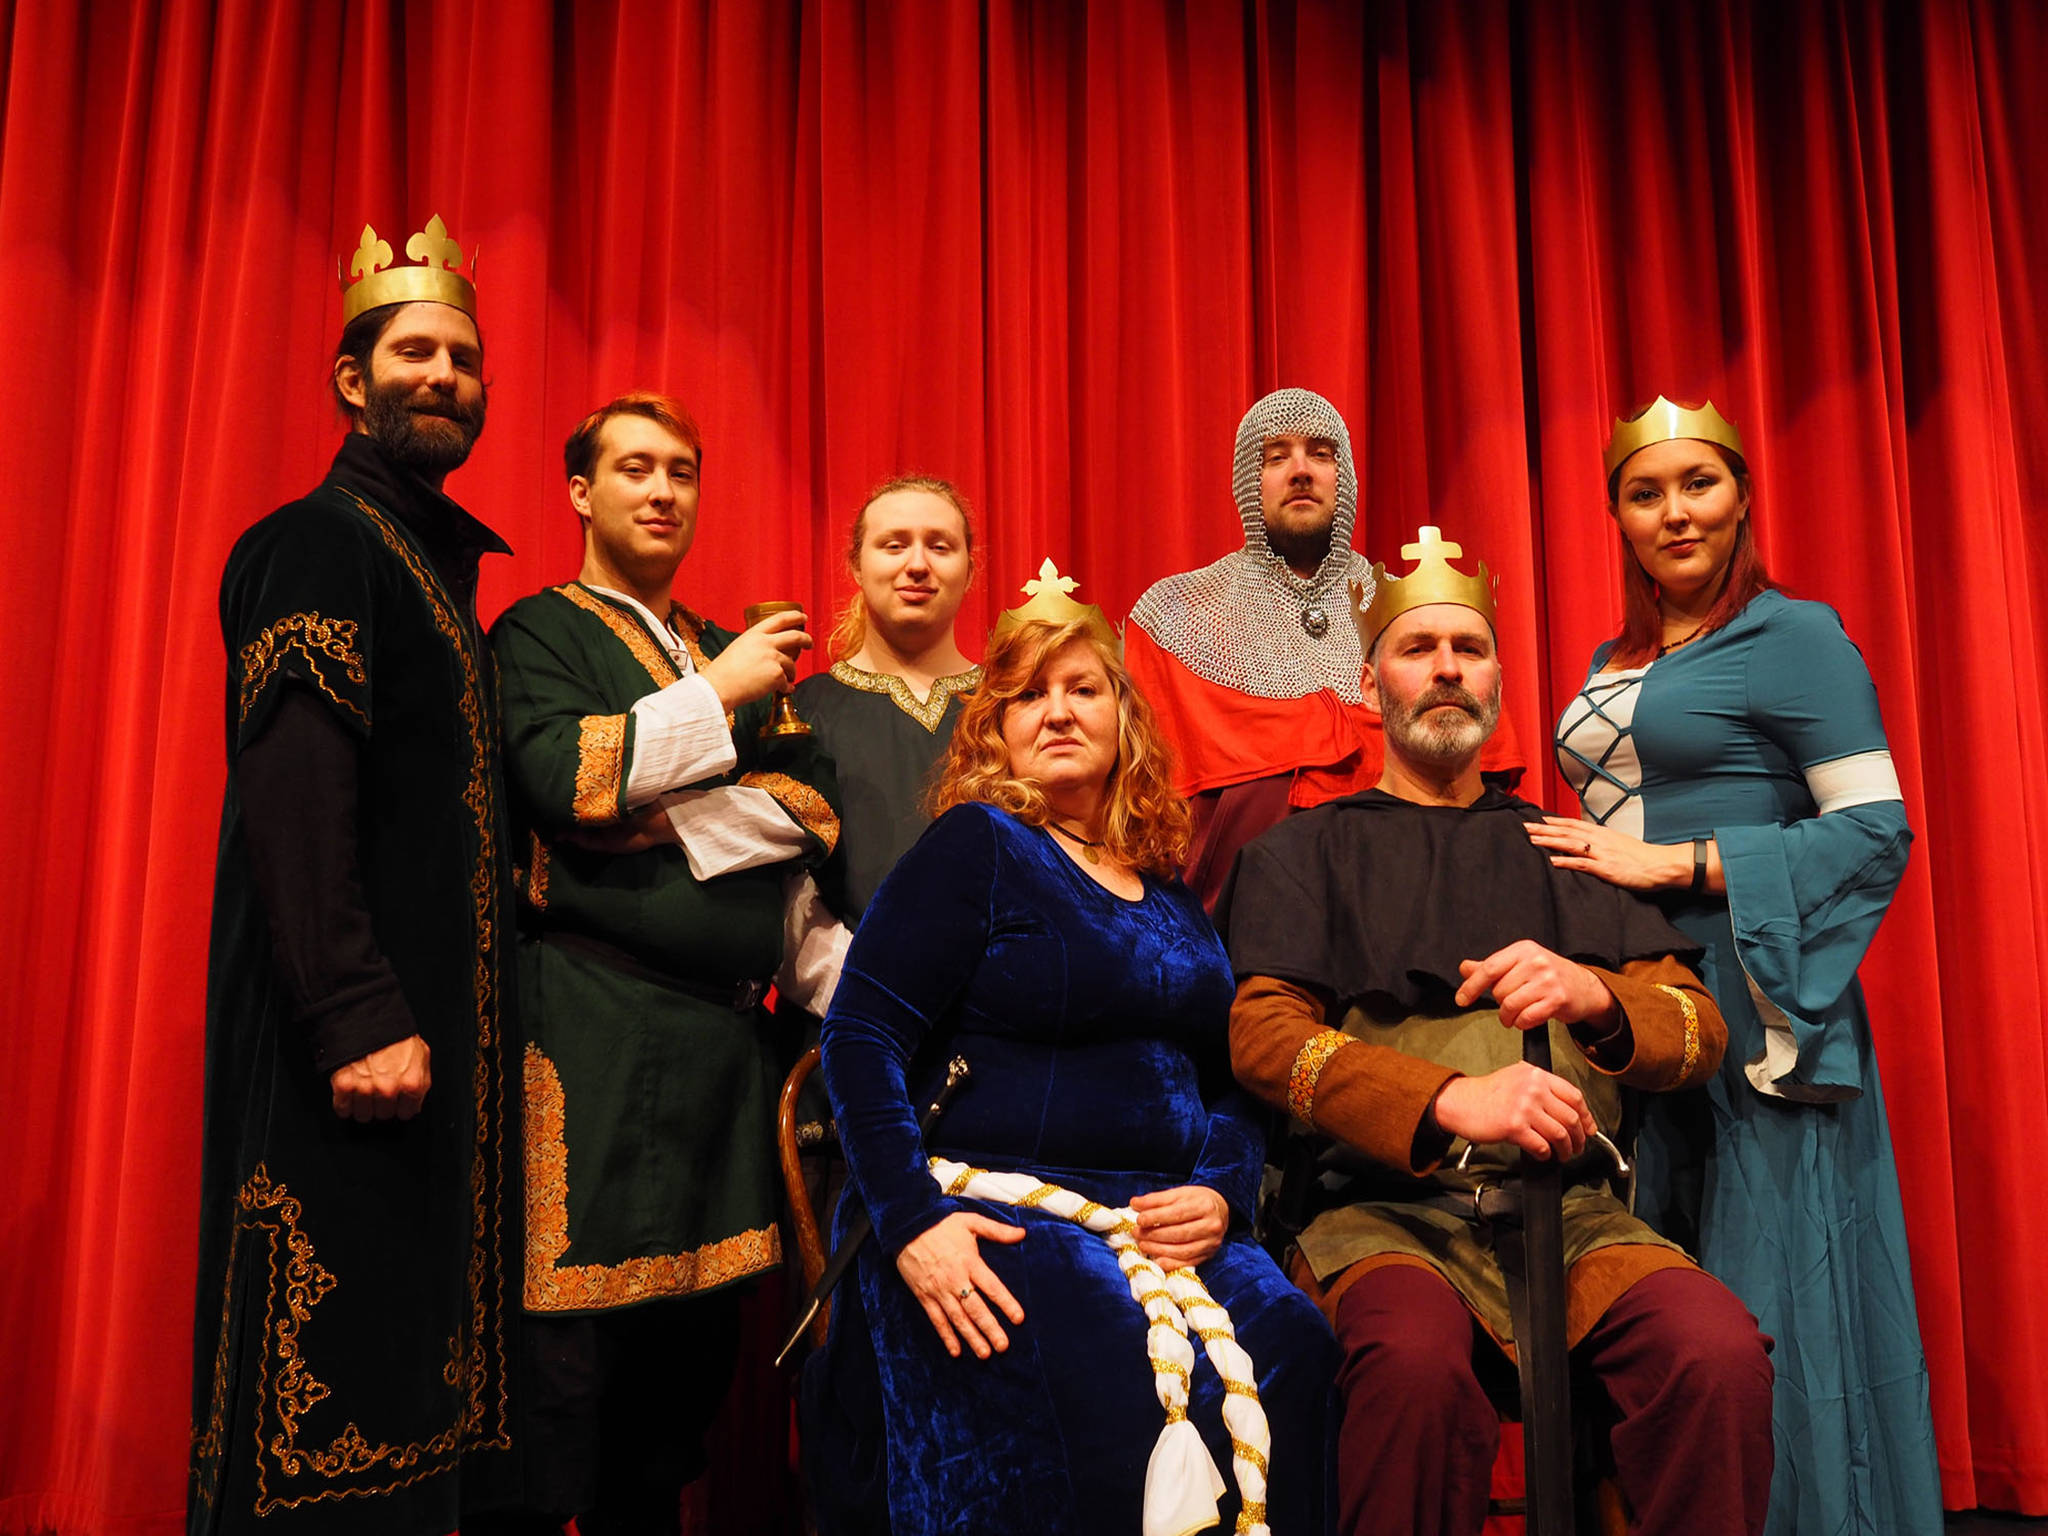 From left to right, Jedediah Blum-Evitts as King Philip II of France, Riyan Stossel as Prince Geoffrey, Dominic Stossel as Prince John, Amanda Randles as Eleanor of Aquitaine, Ryan Staska as Prince Richard, Mark Zeiger as King Henry II of England, and Gina Randles as Princess Alais Capet in the Merry Trickers of Haines’ performance of “The Lion in Winter.” Photos by John Hagen.